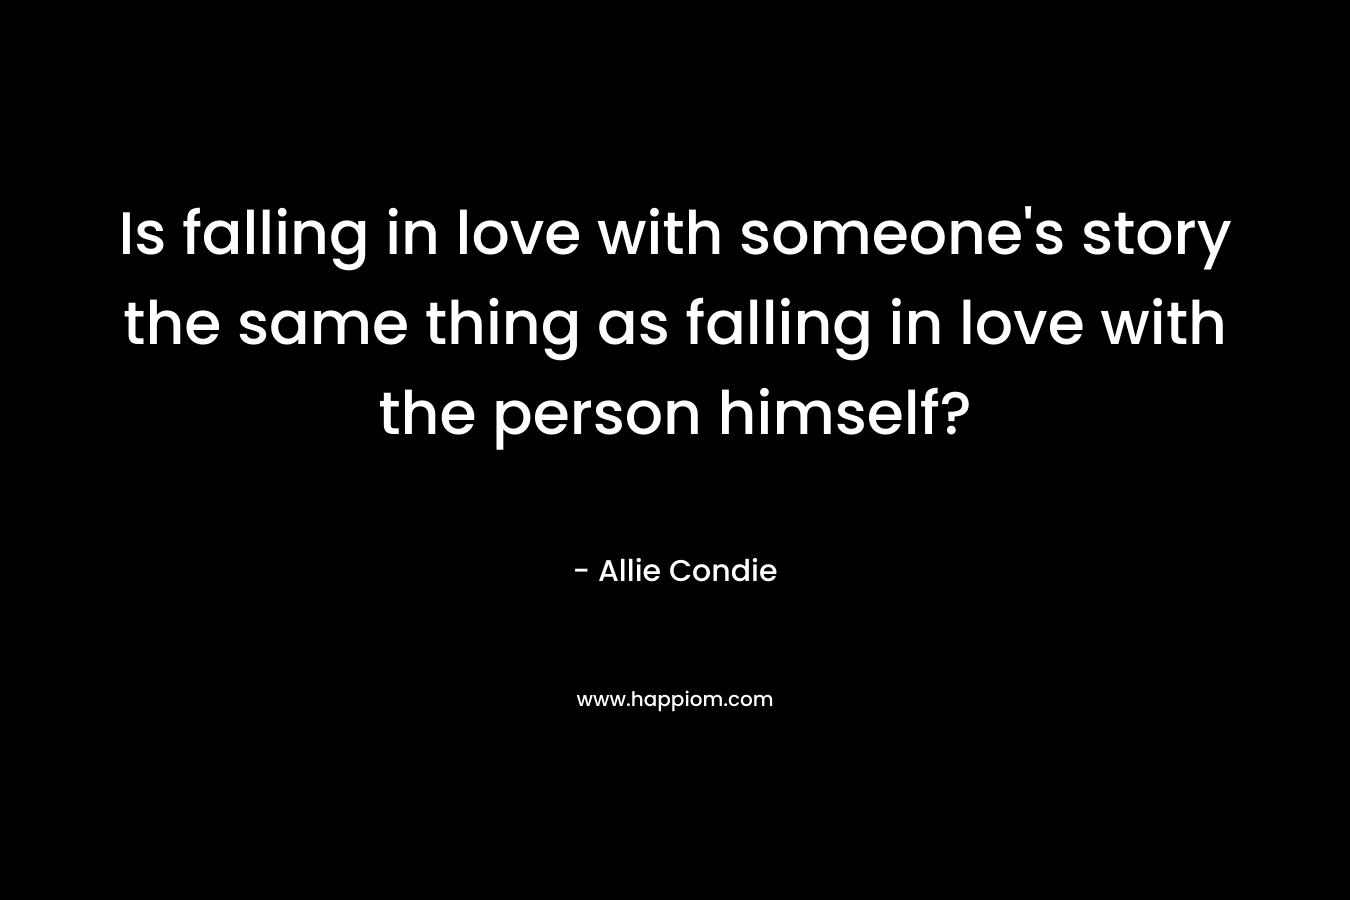 Is falling in love with someone's story the same thing as falling in love with the person himself?